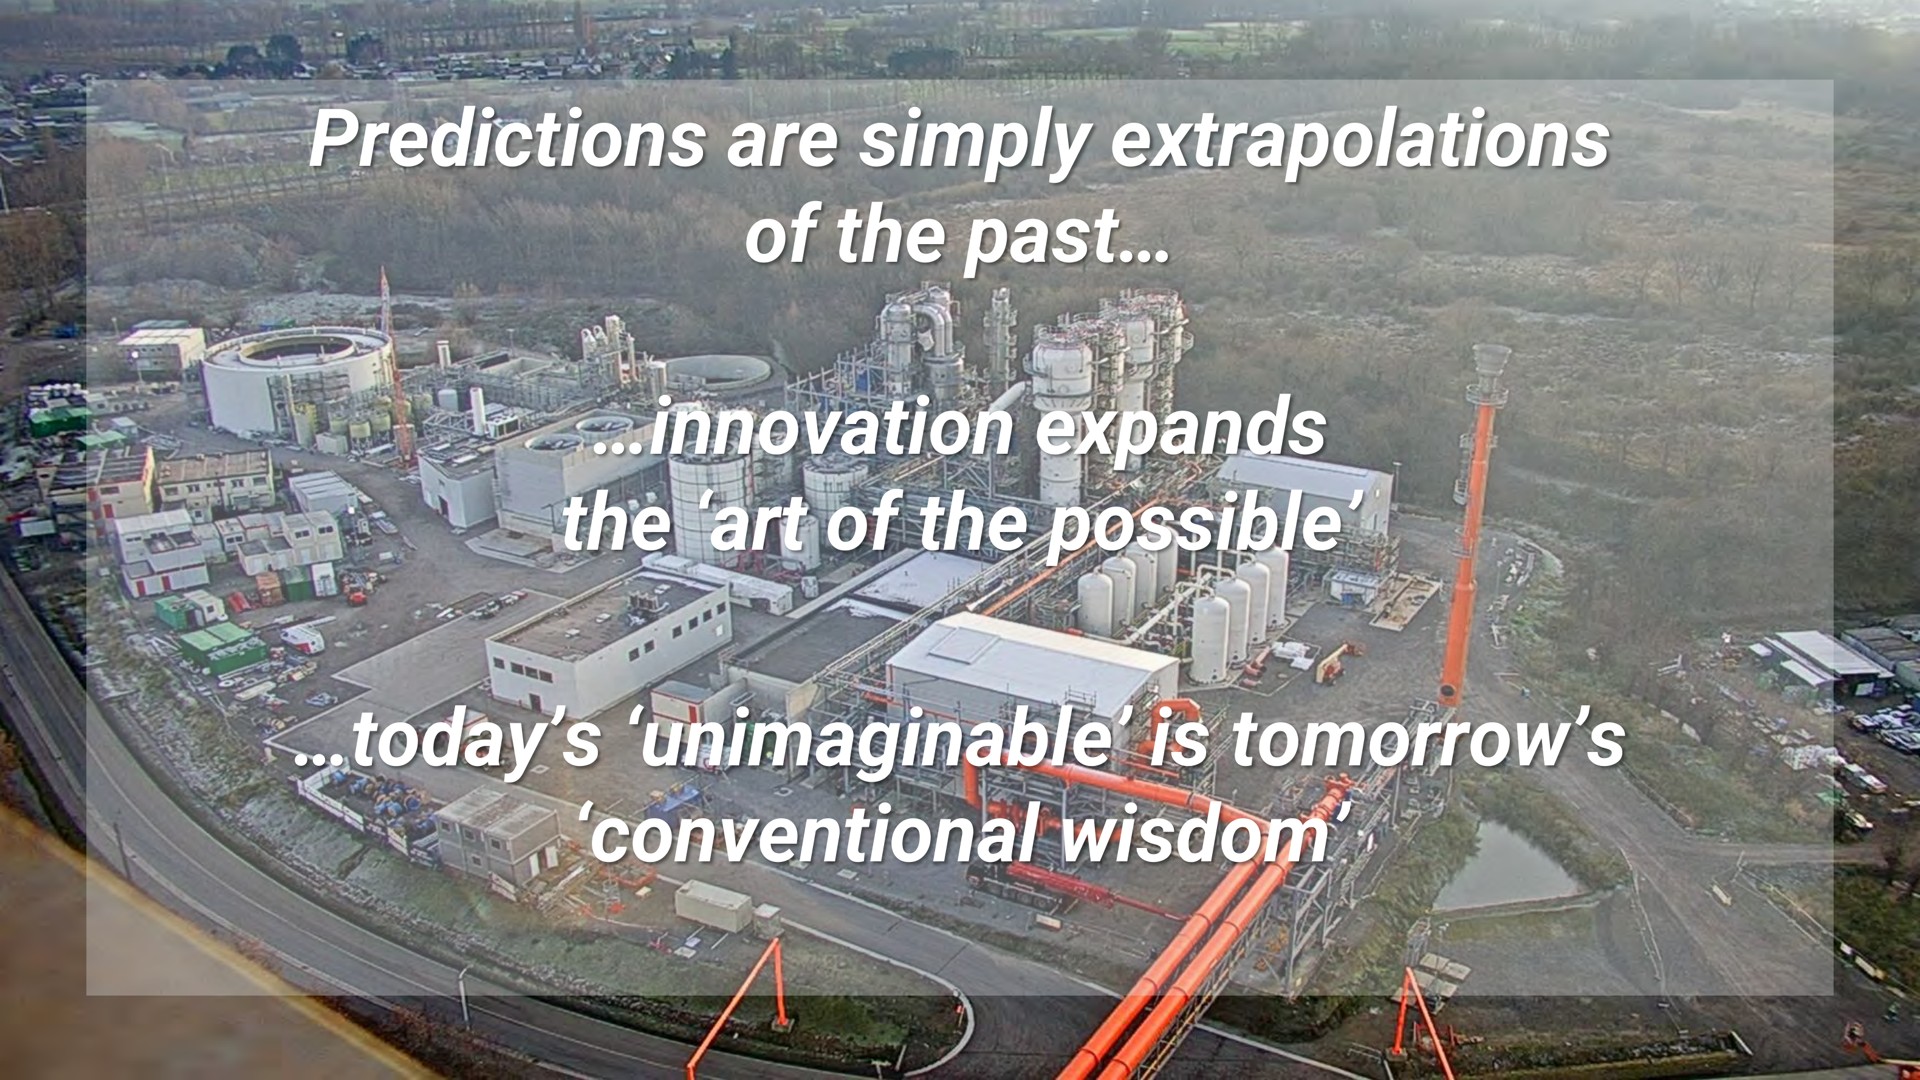 predictions are simply extrapolations of the past innovation expands the art of the possible today unimaginable is tomorrow conventional wisdom i a tie vee | LanzaTech